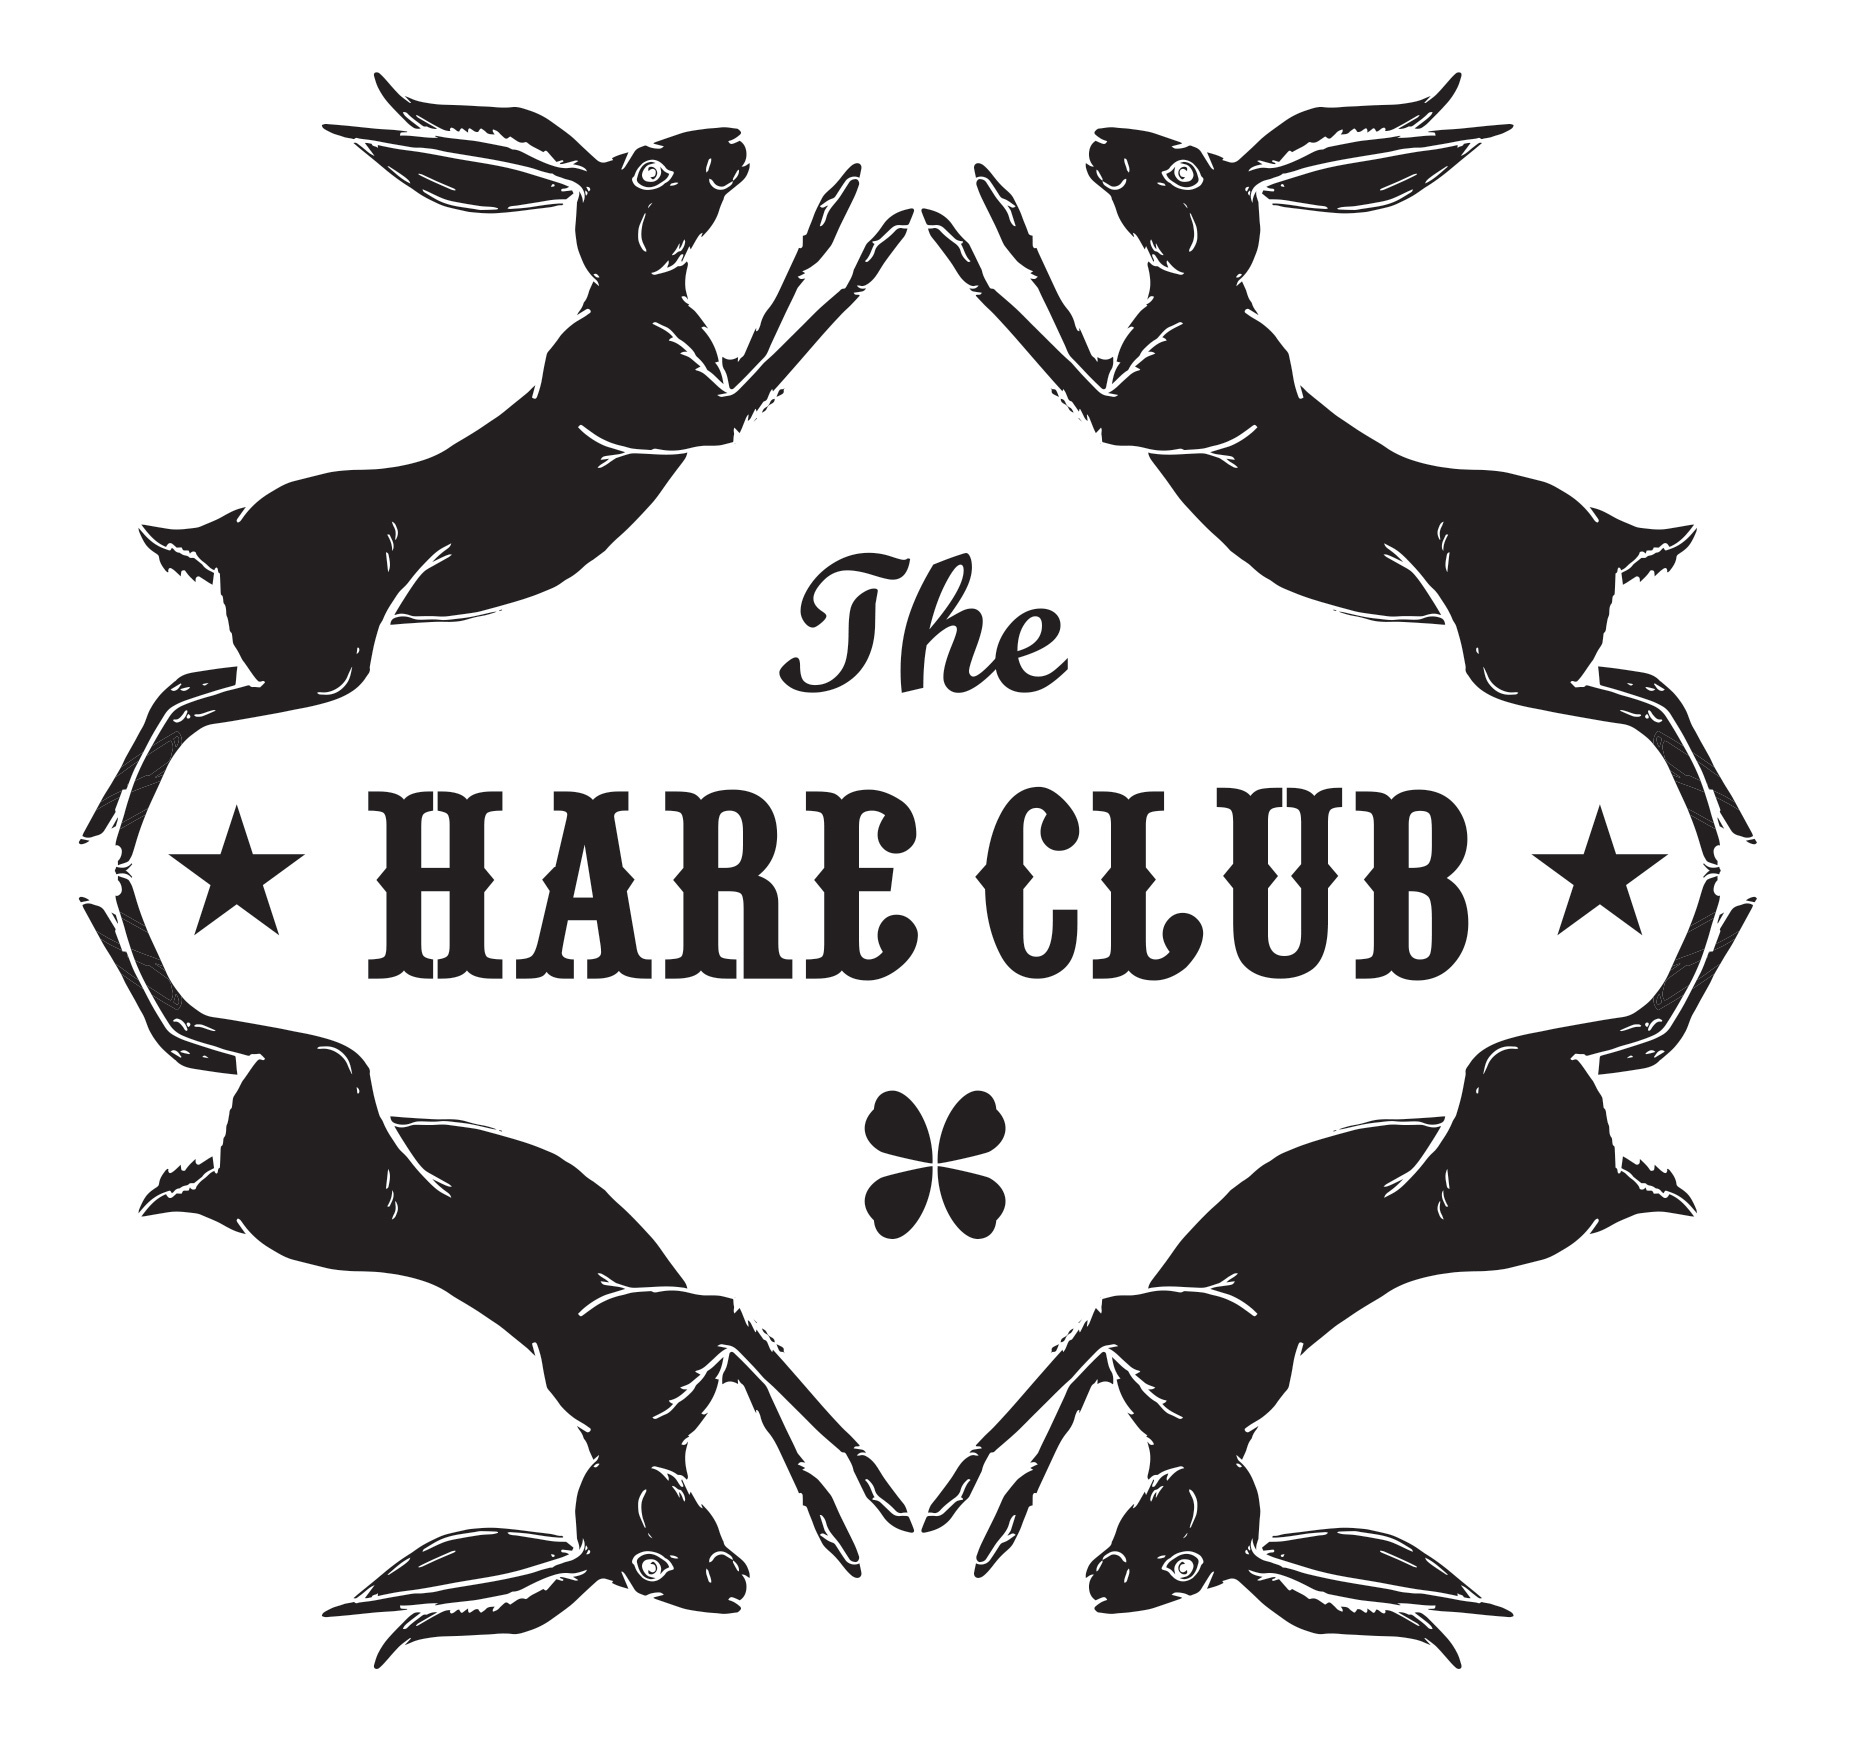 The Hare Club exclusive membership join today gift idea local craft beer near me brewery tour beer dinner